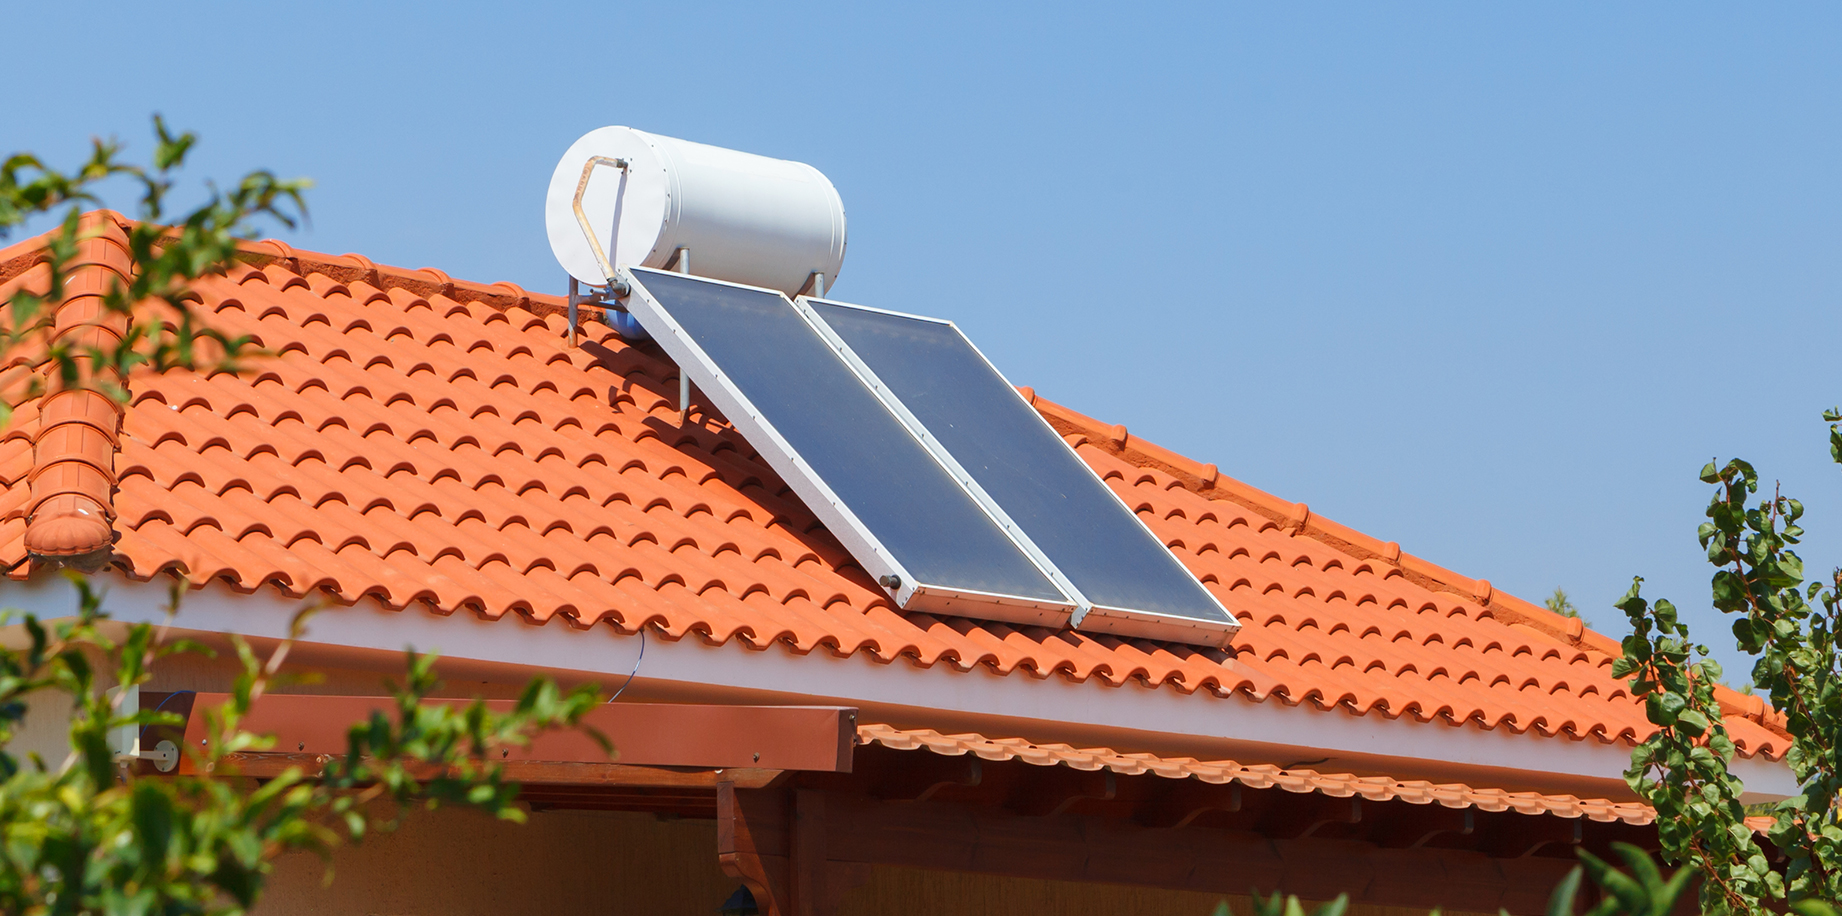 Why aren't solar water heaters more popular in the U.S.?